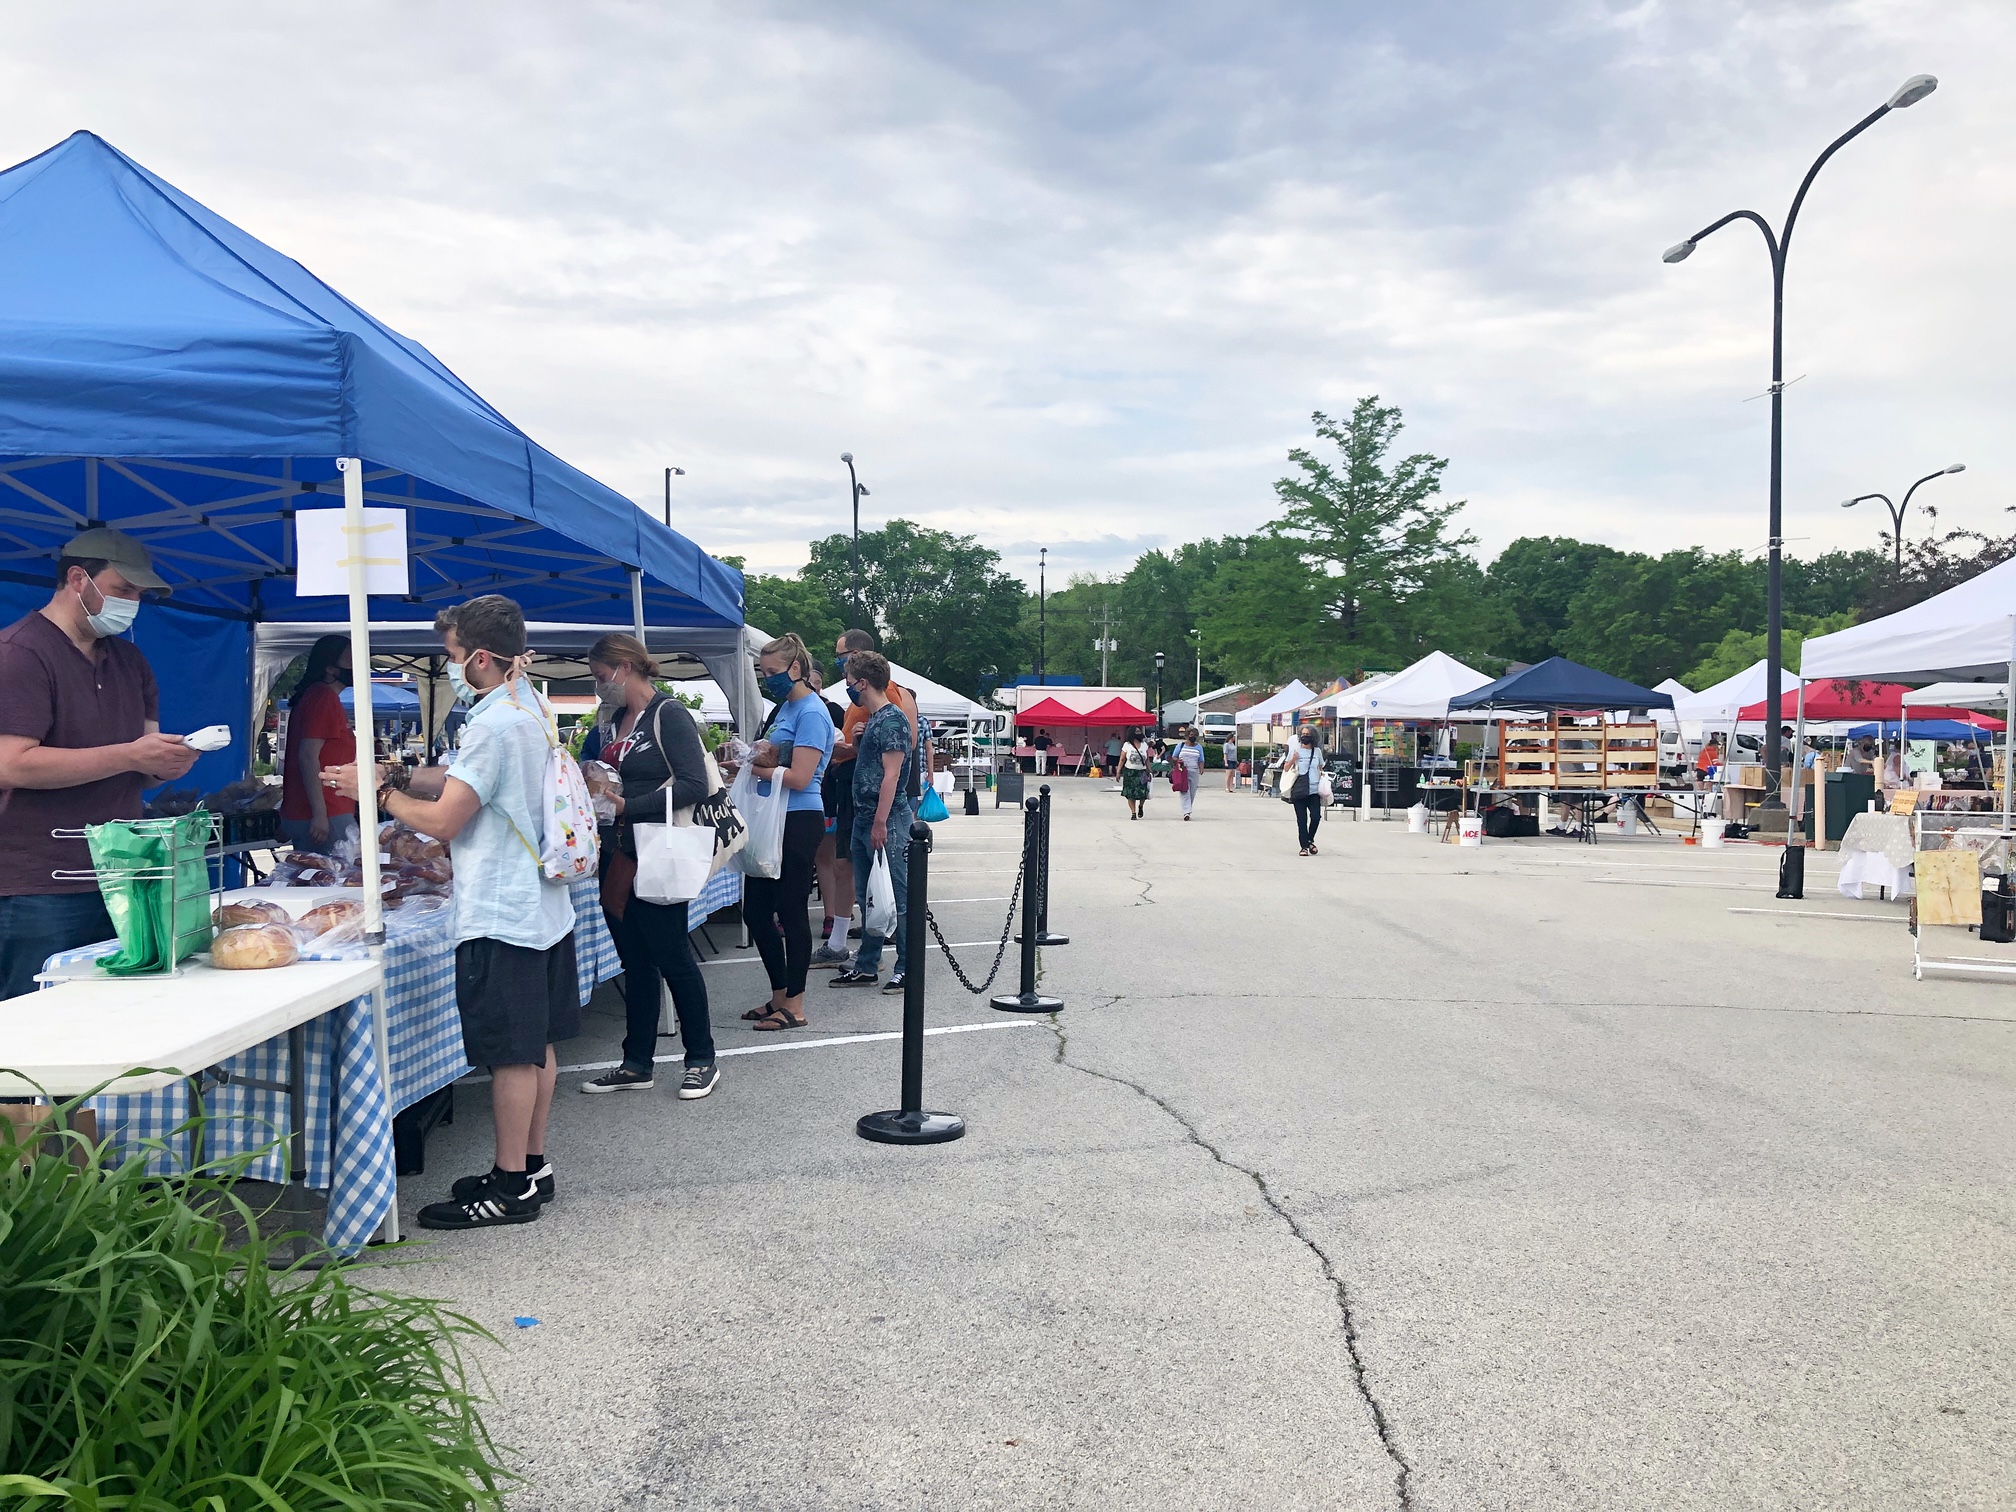 The Urbana market has shoppers outdoors in the Lincoln Square Mall parking lot. Vendors have blue or white tents with tables of goods for sale. Photo by Alyssa Buckley.